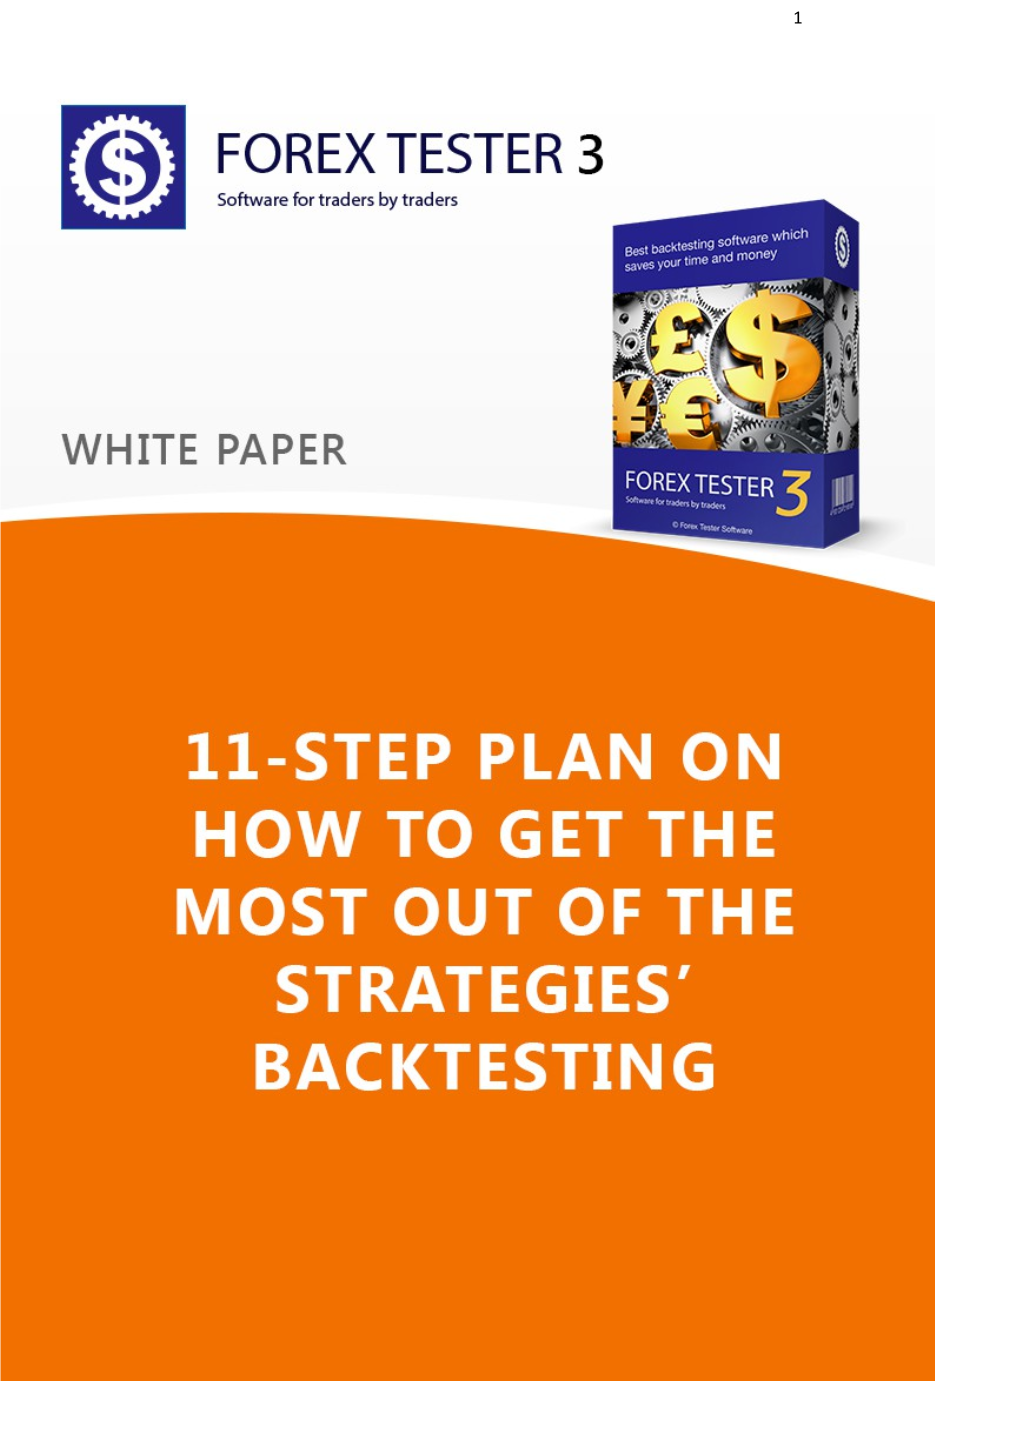 Pick Any Strategy You Like from the 10 Simple Free Strategies File